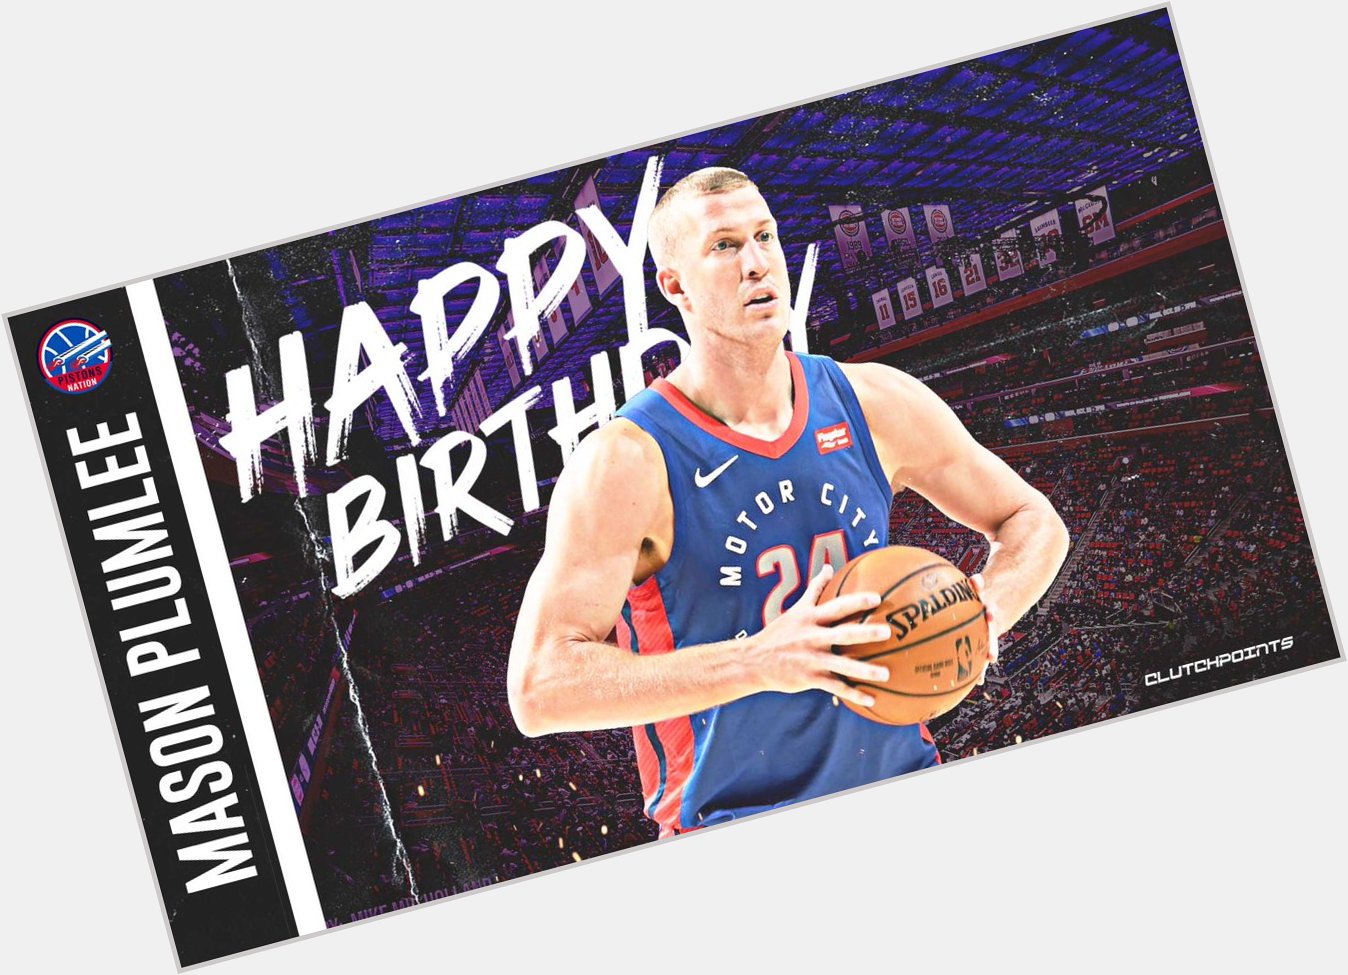 Mason Plumlee is turning 31 today!

Let\s all wish him a happy birthday! 